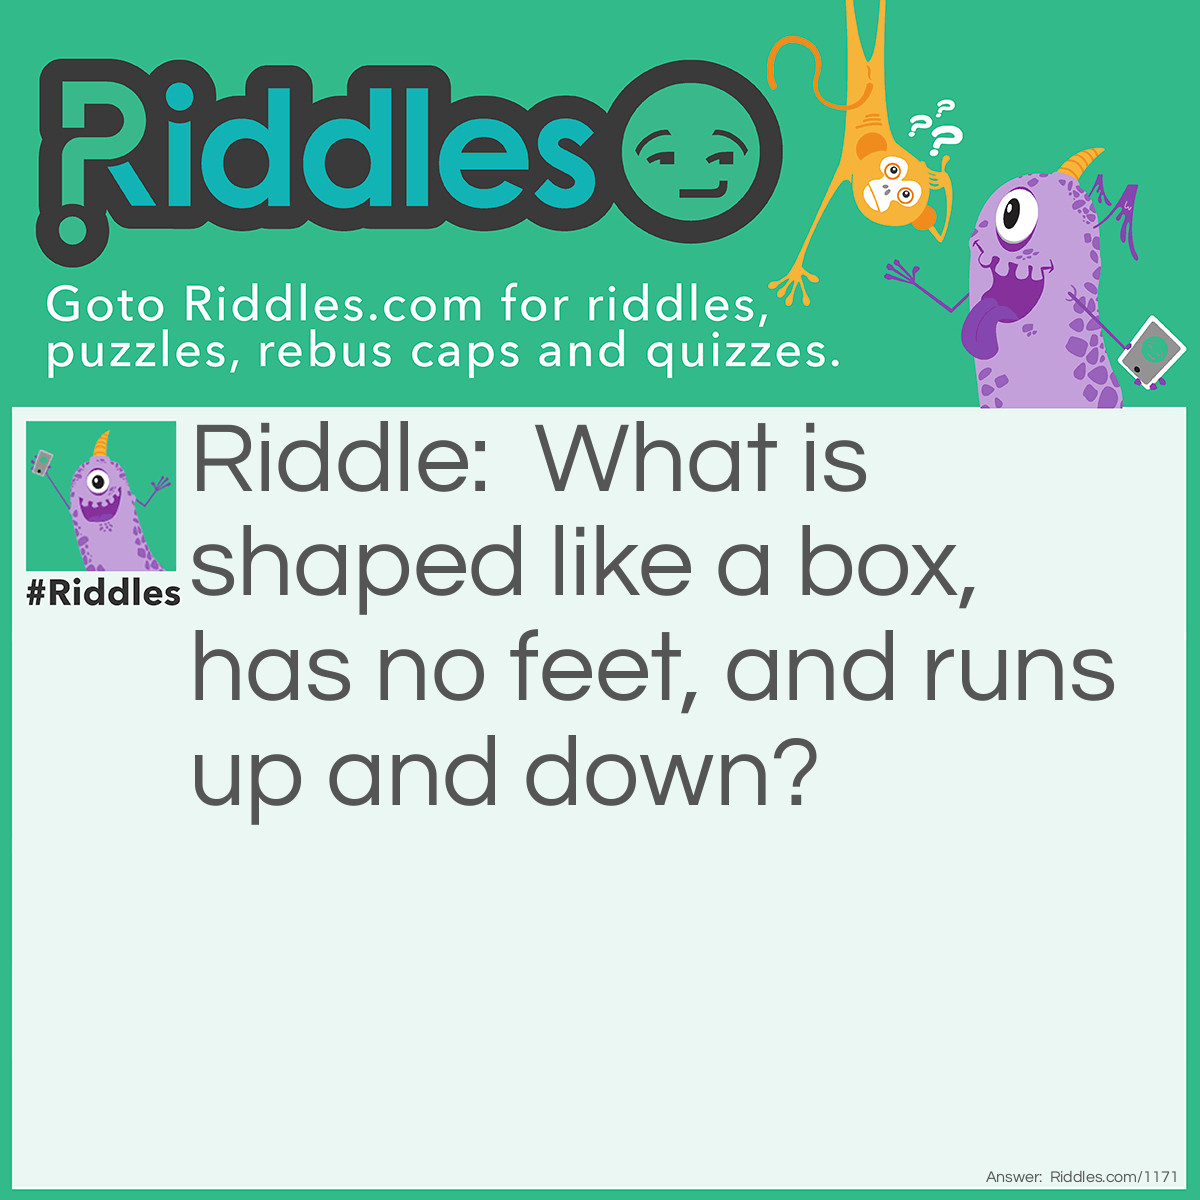 Riddle: What is shaped like a box, has no feet, and runs up and down? Answer: An Elevator.